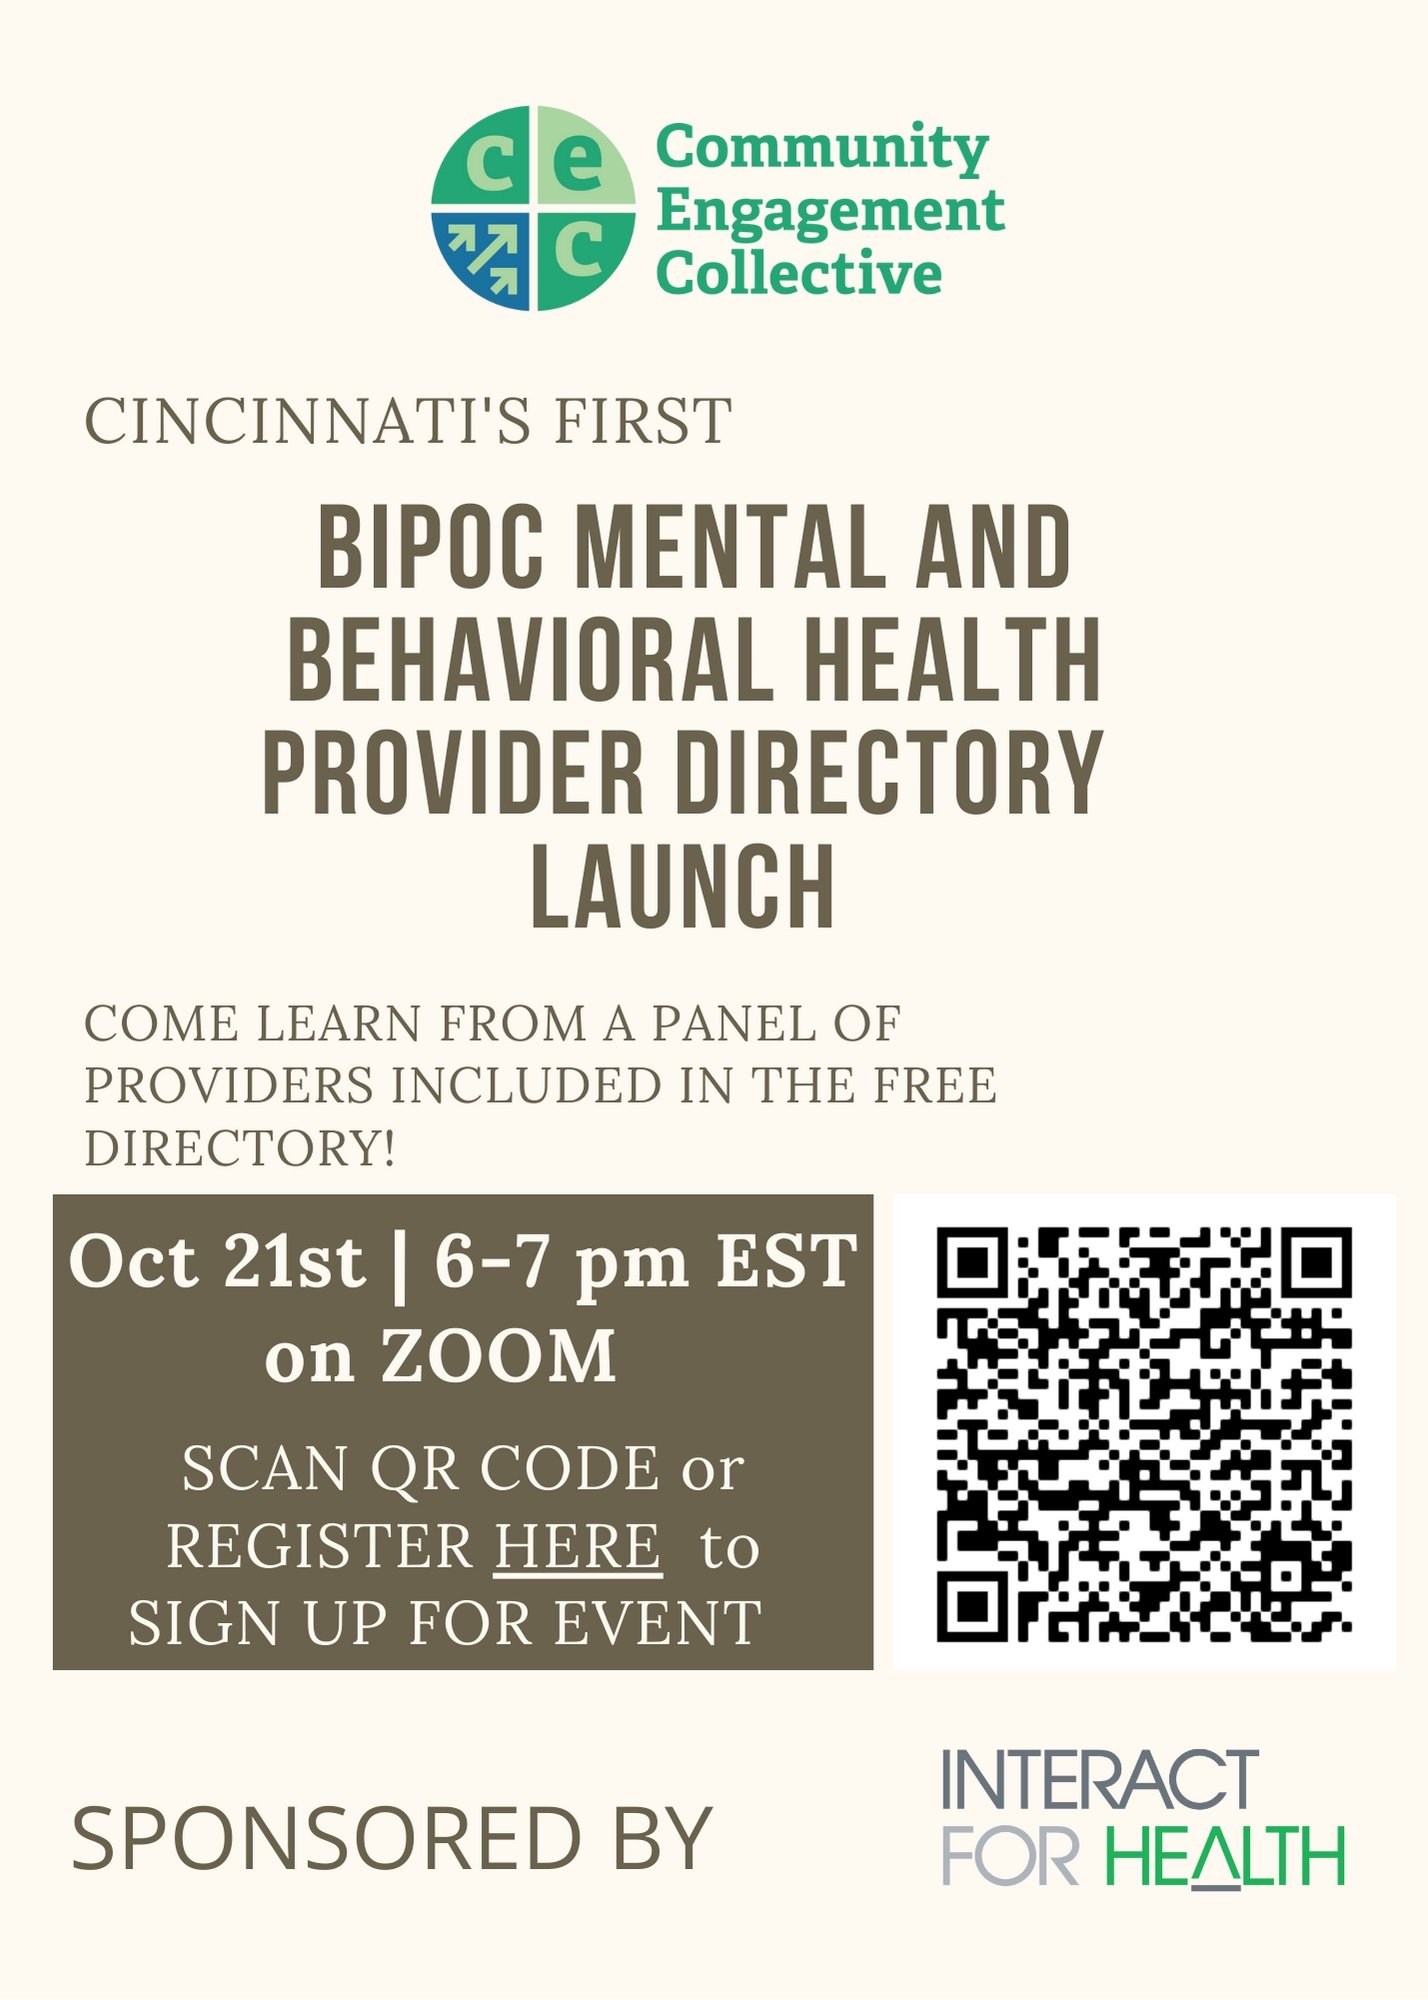 BIPOC MENTAL AND BEHAVIORAL HEALTH DIRECTORY LAUNCH Flyer.jpg